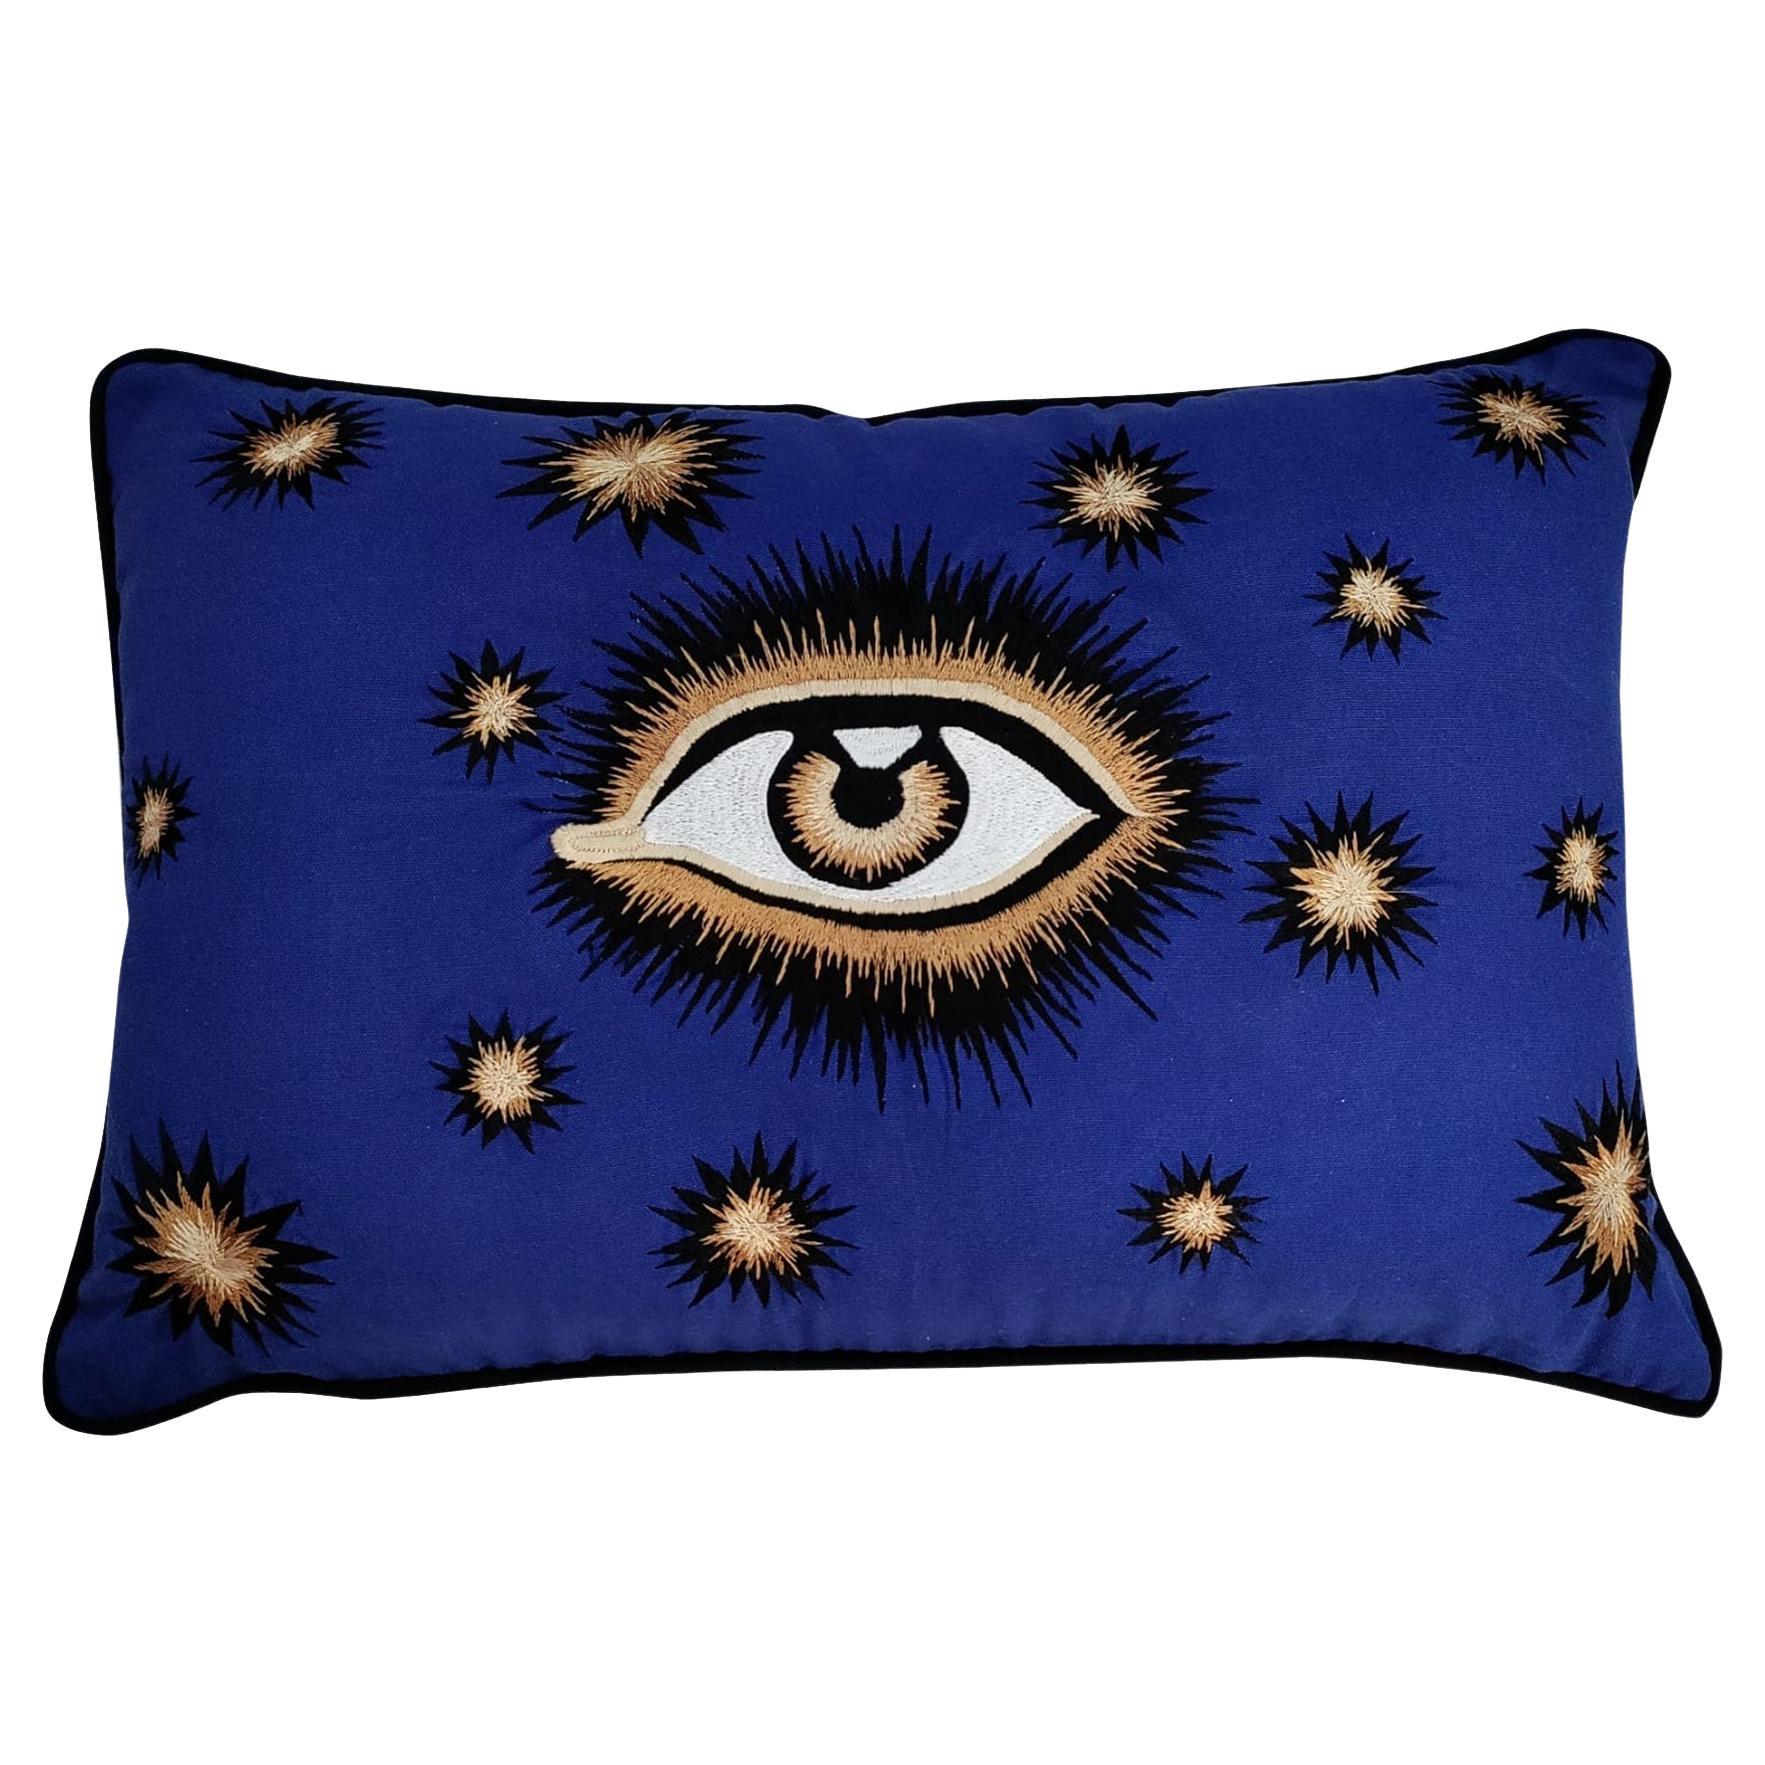 Eye Handembroidered blue Pillow